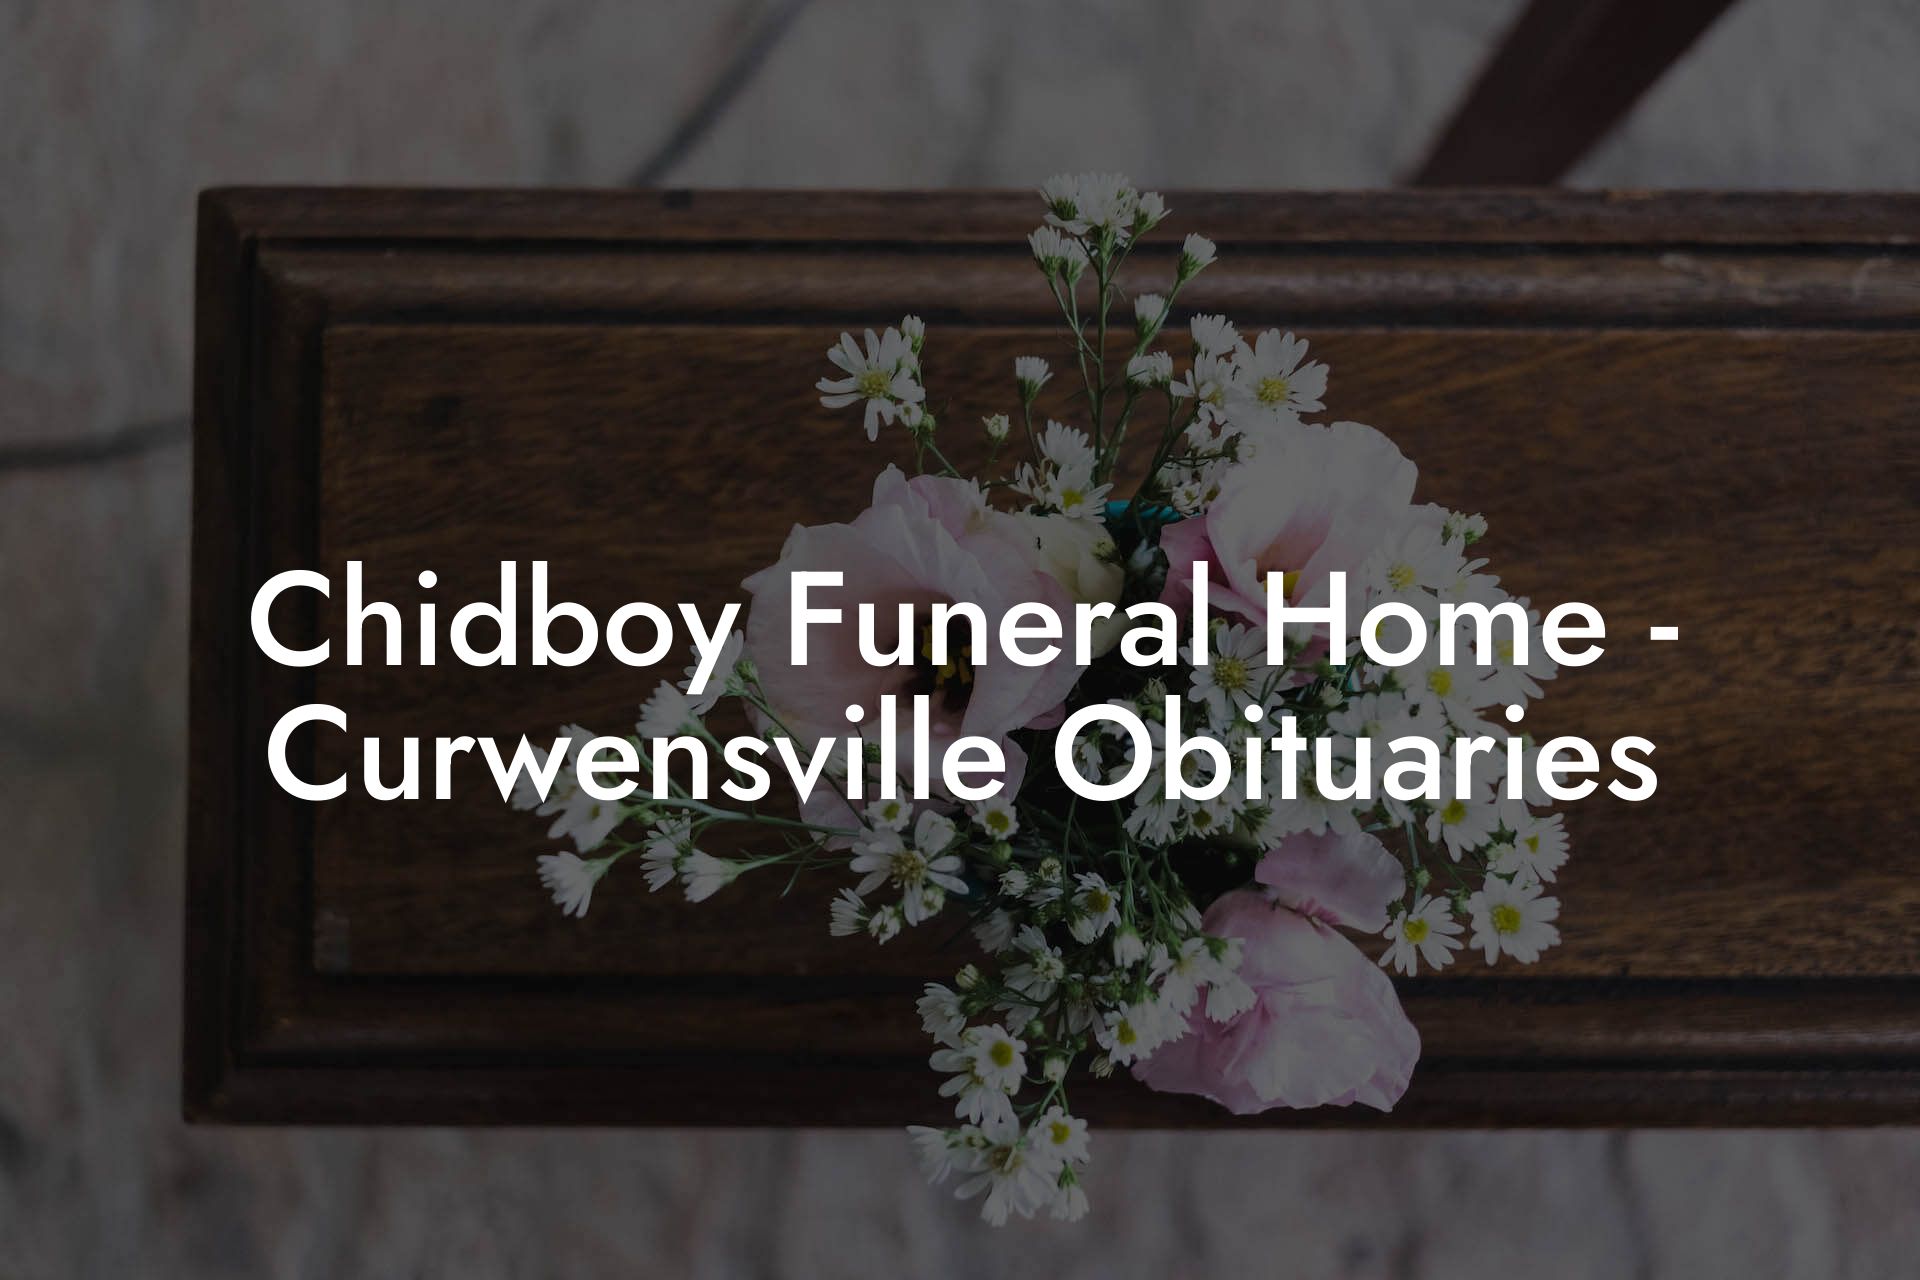 Chidboy Funeral Home - Curwensville Obituaries